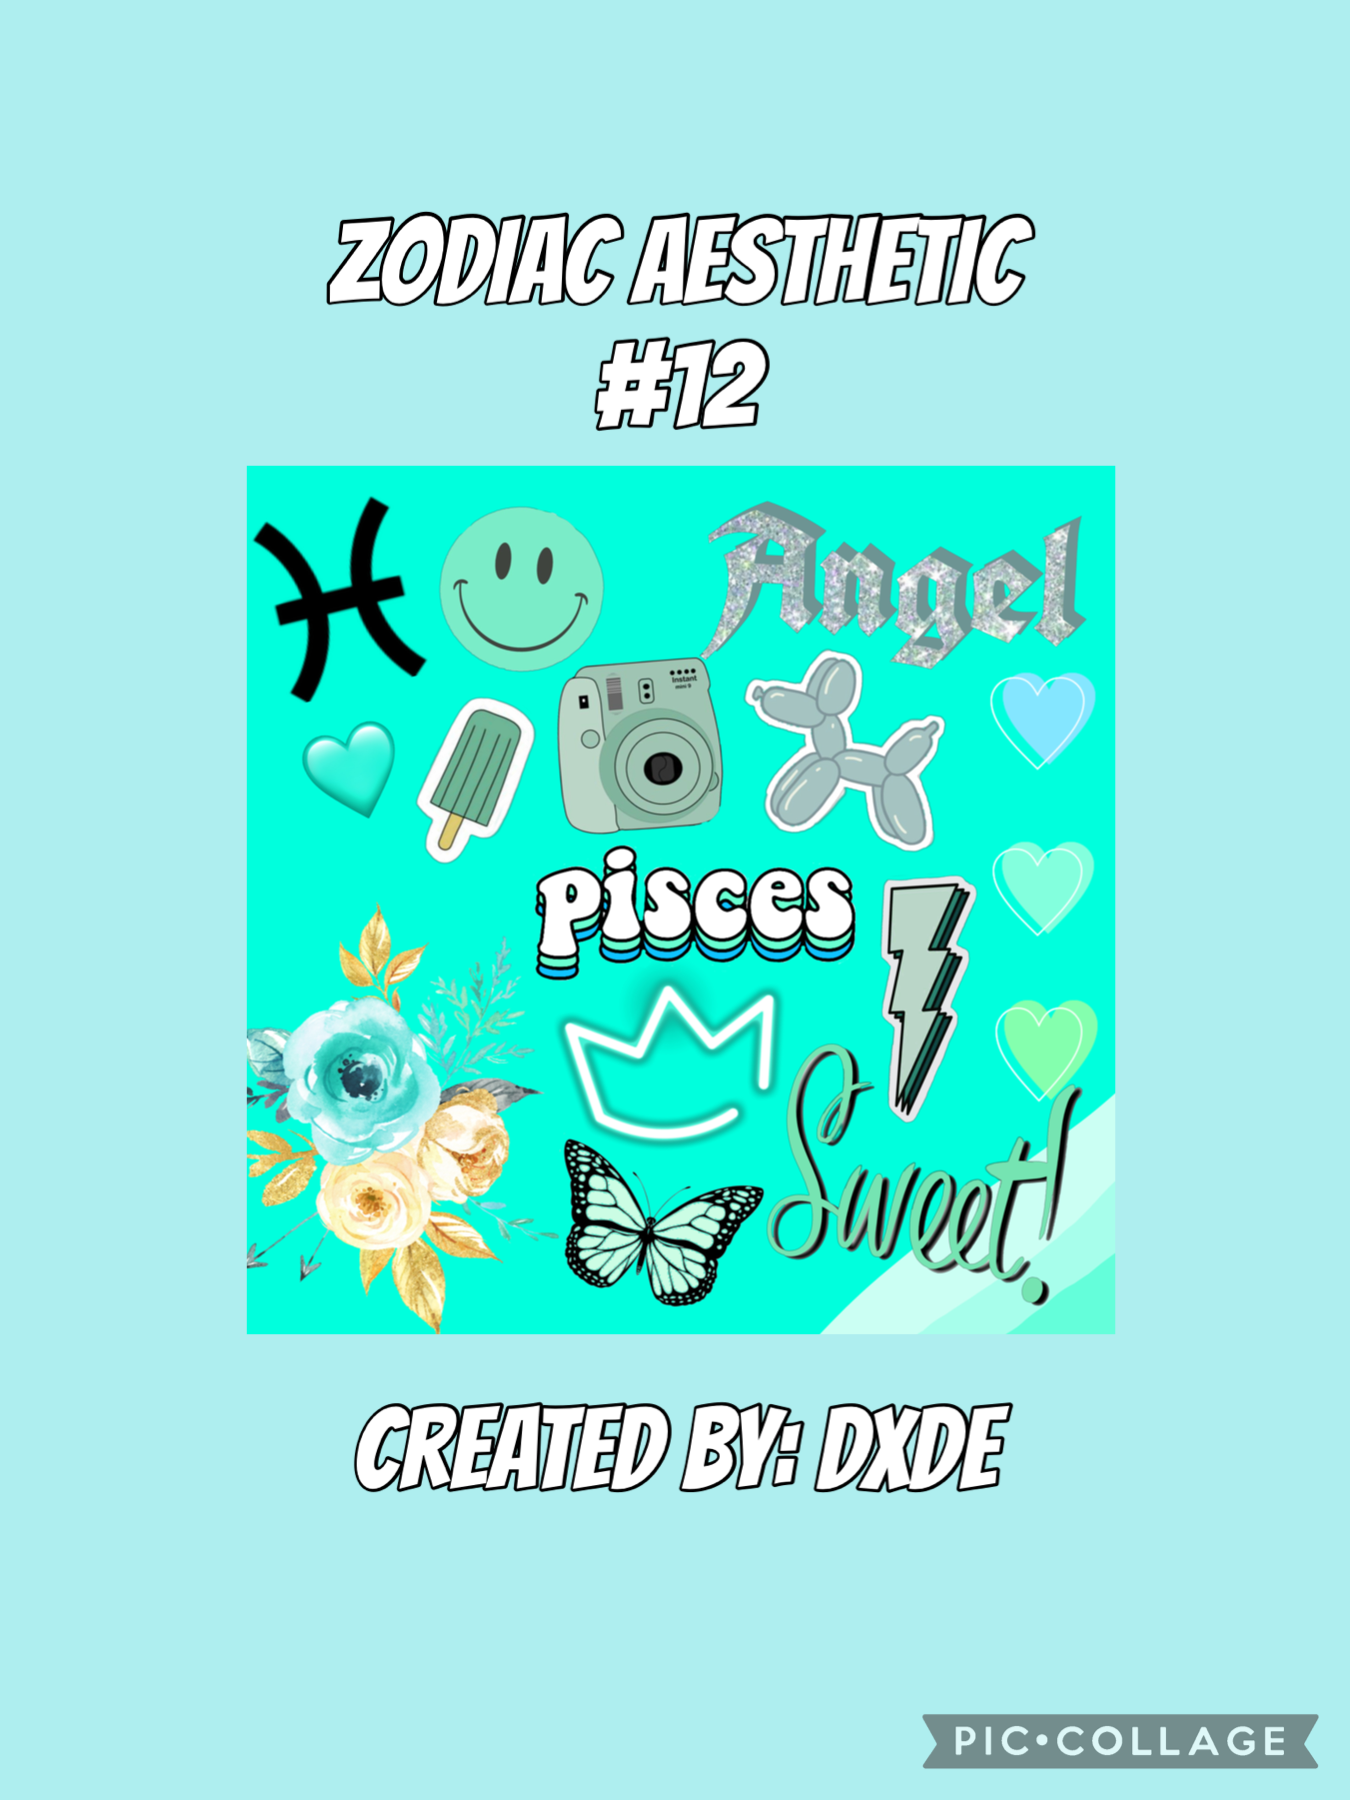 Enjoy this Aesthetic, This was the last Zodiac sign! #pisces♓️